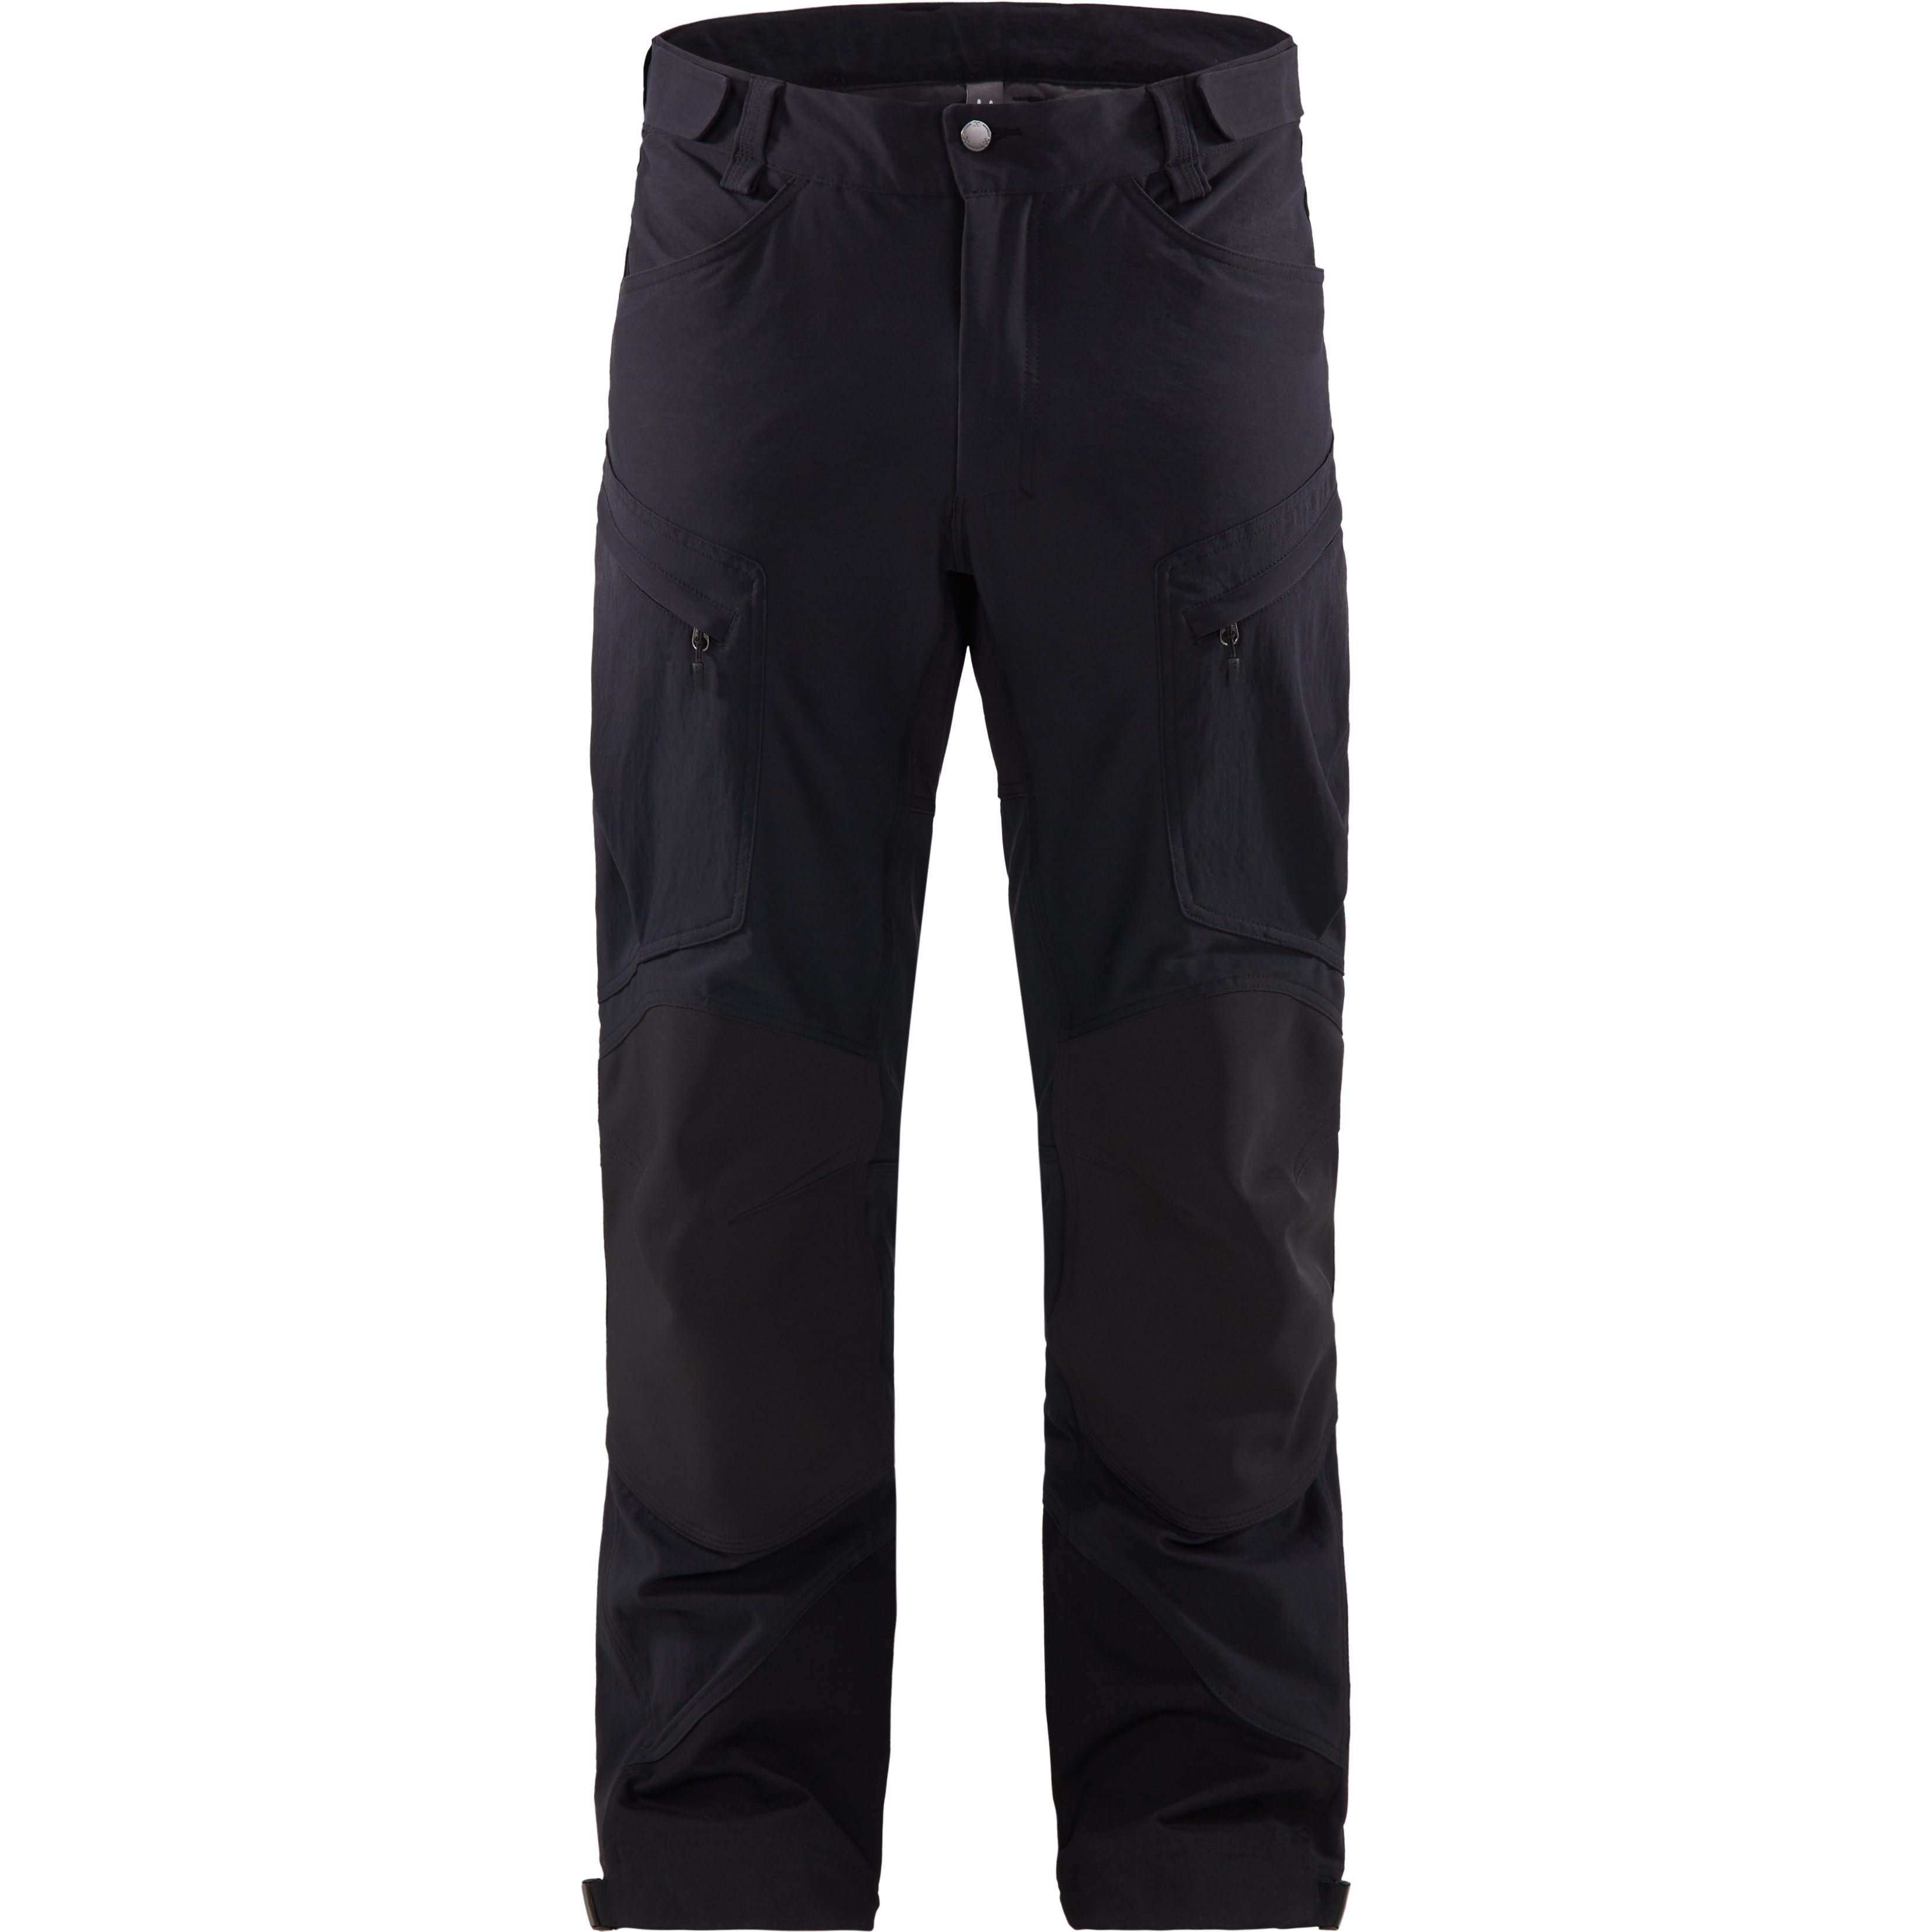 Men’s Rugged Mountain Pant True Black Solid